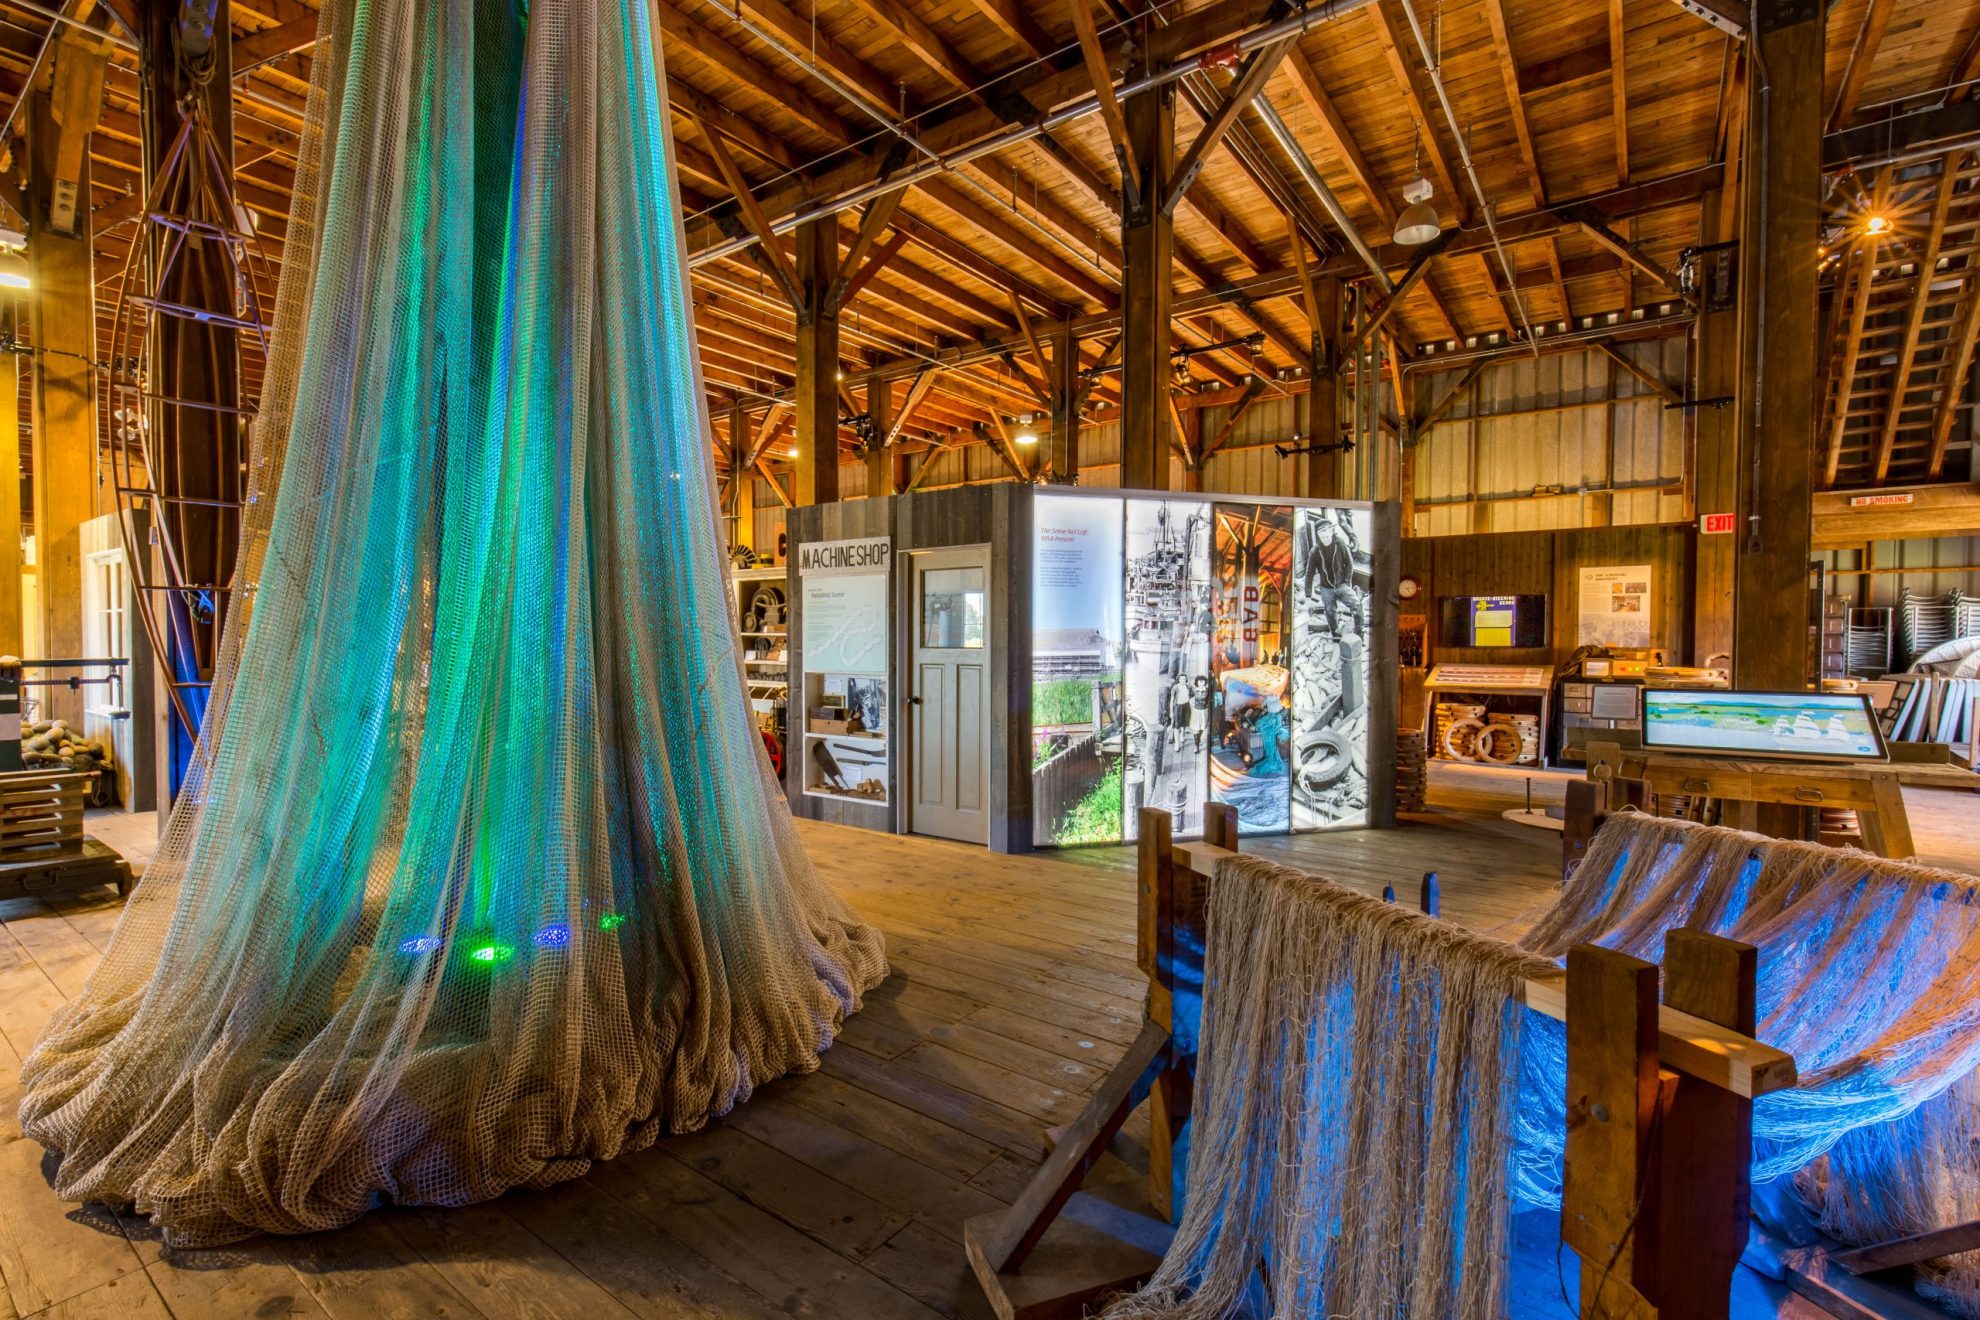 Interior displays of fishing nets illuminated with green and blue lights in the Seine Net Loft